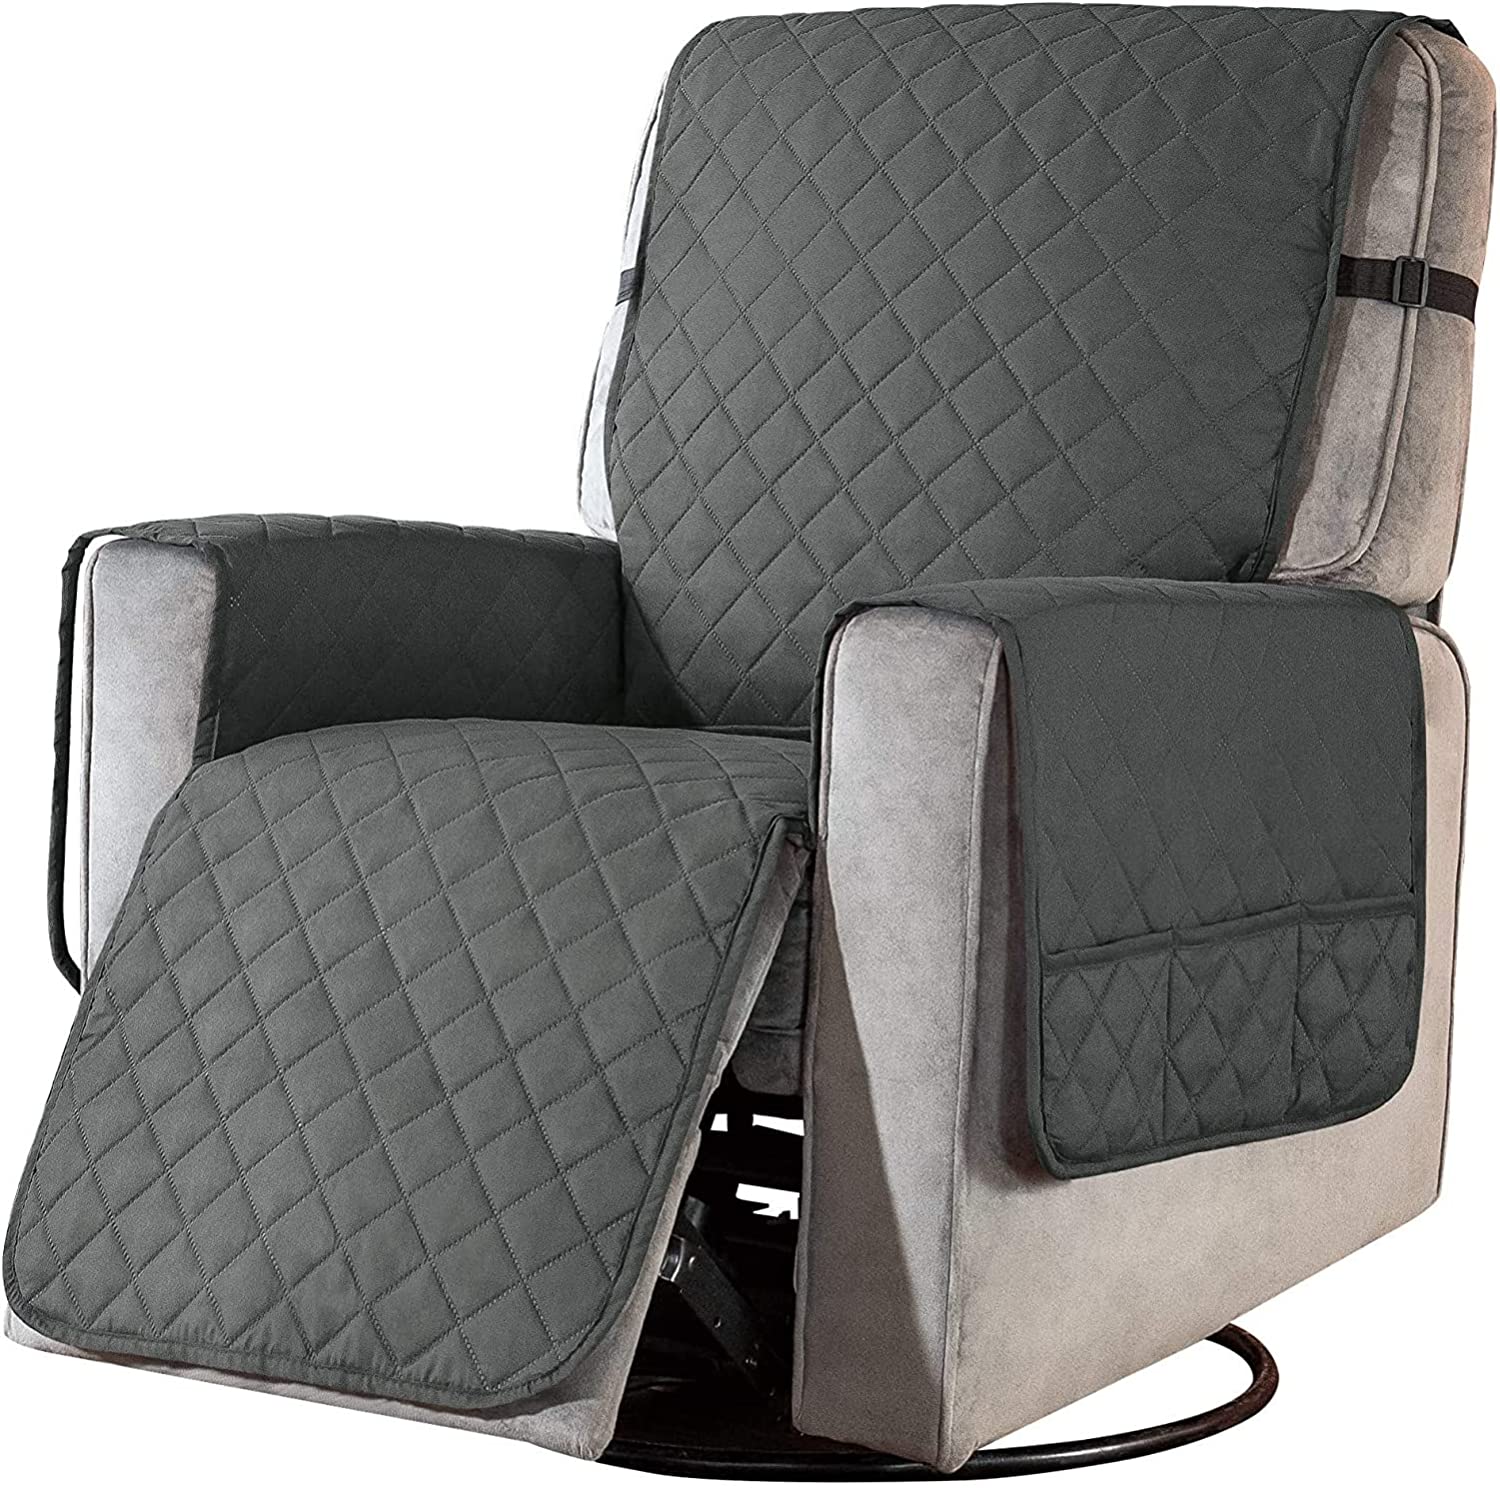 FLOOFI Pet Sofa Cover Recliner Chair L Size with Pocket (Grey) FI-PSC-119-BY